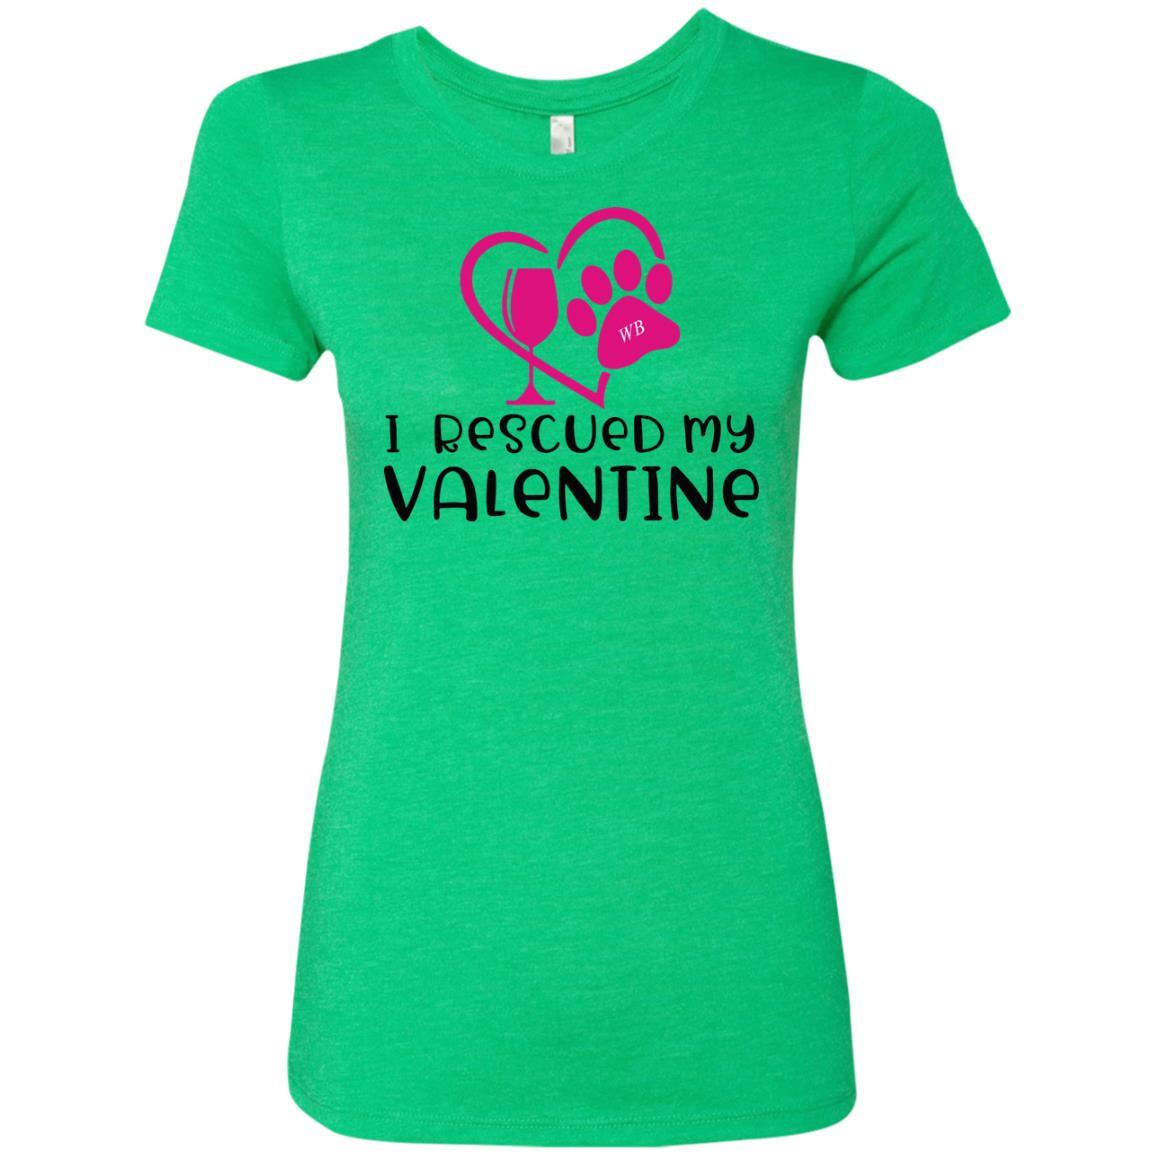 T-Shirts Envy / S Winey Bitches Co "I Rescued My Valentine" Ladies' Triblend T-Shirt WineyBitchesCo